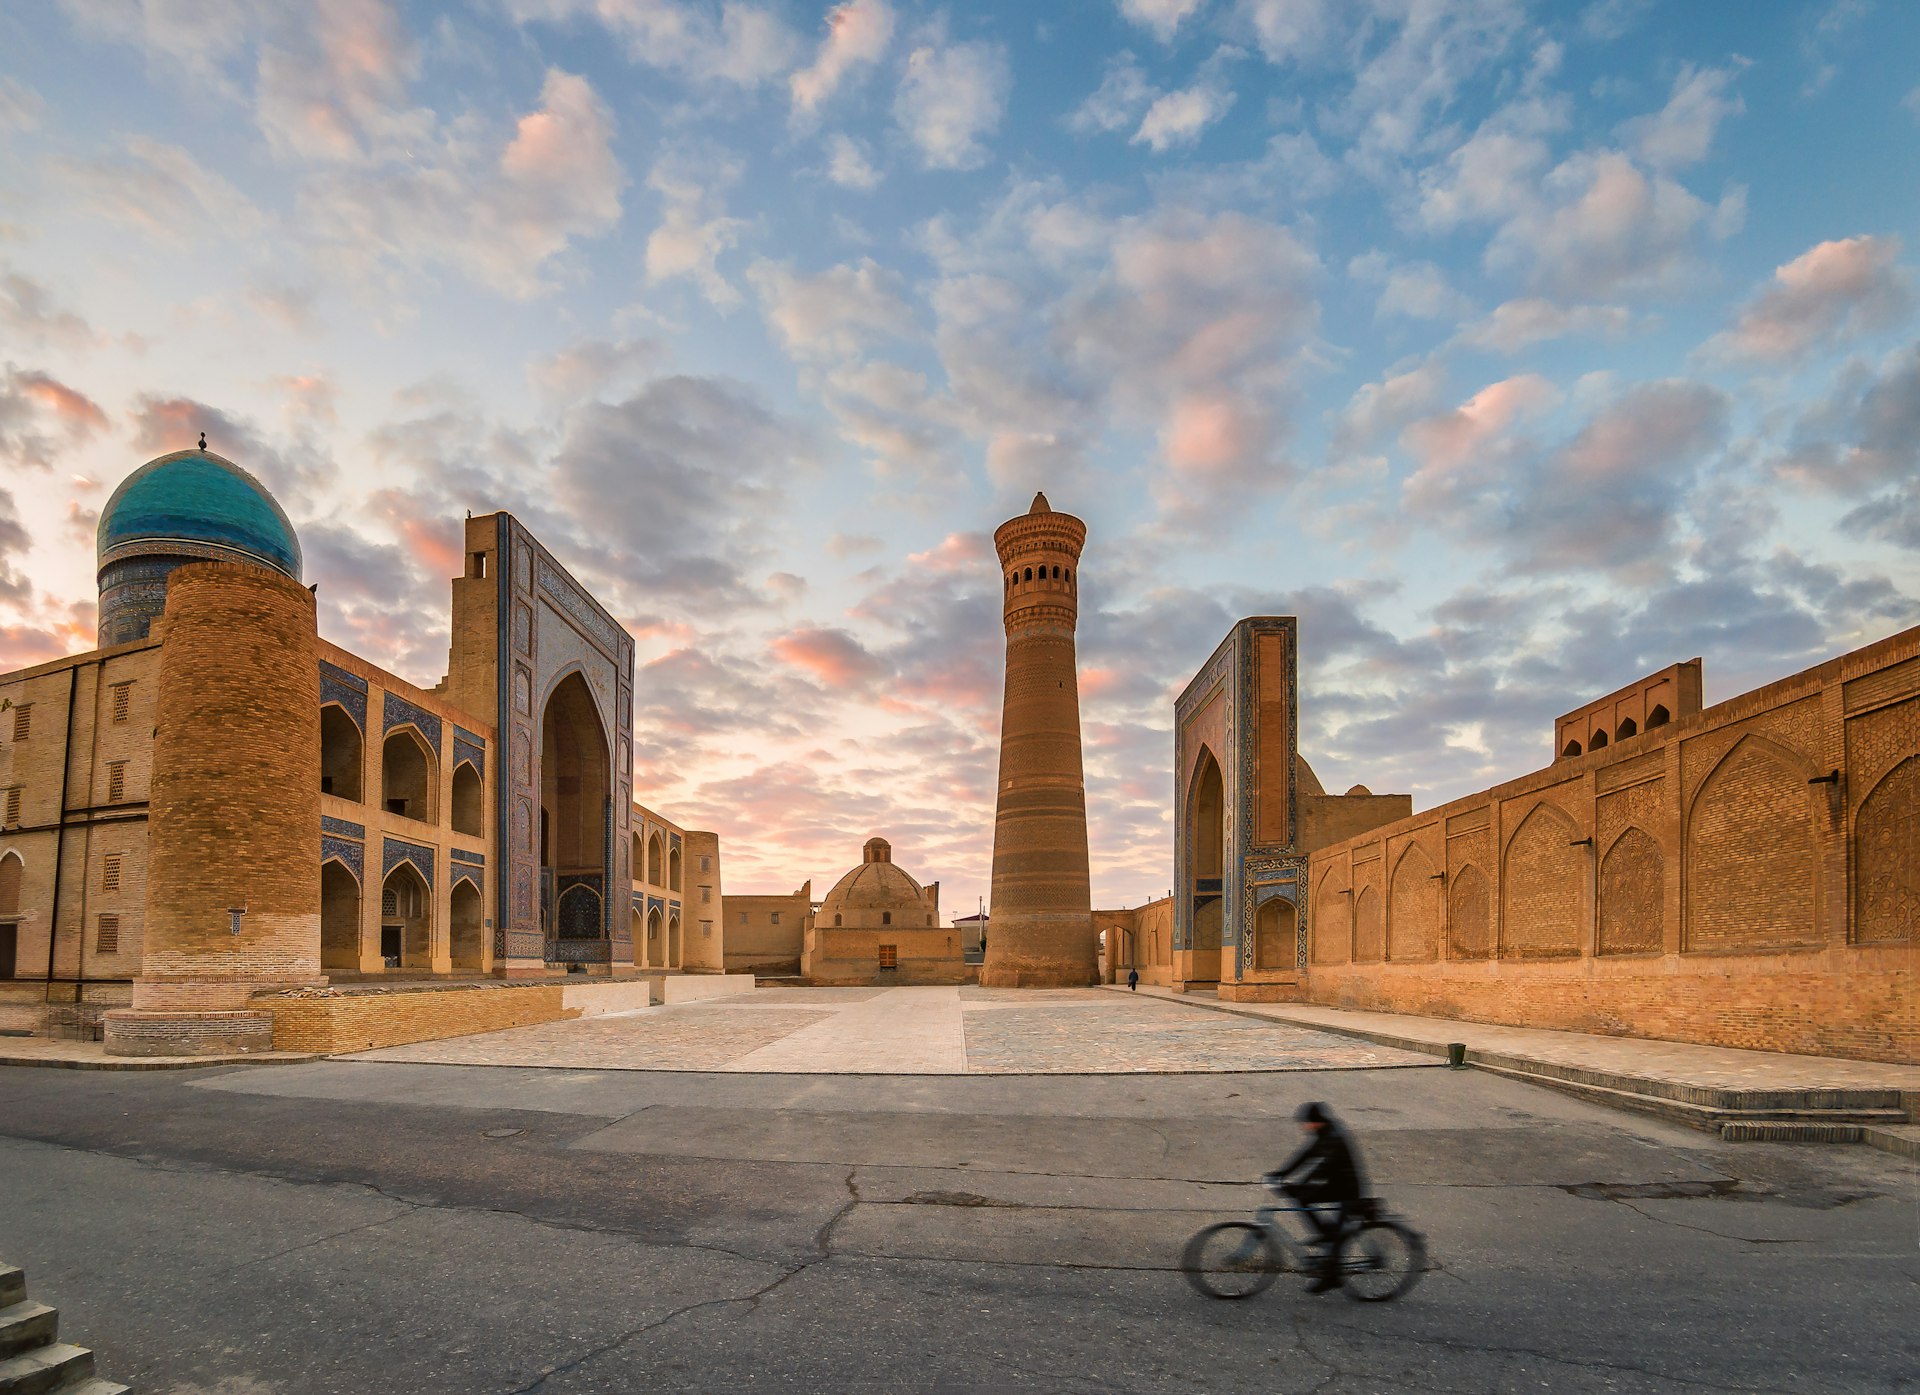 A cyclist passes by an epic square lined with ancient walls and a tall minaret